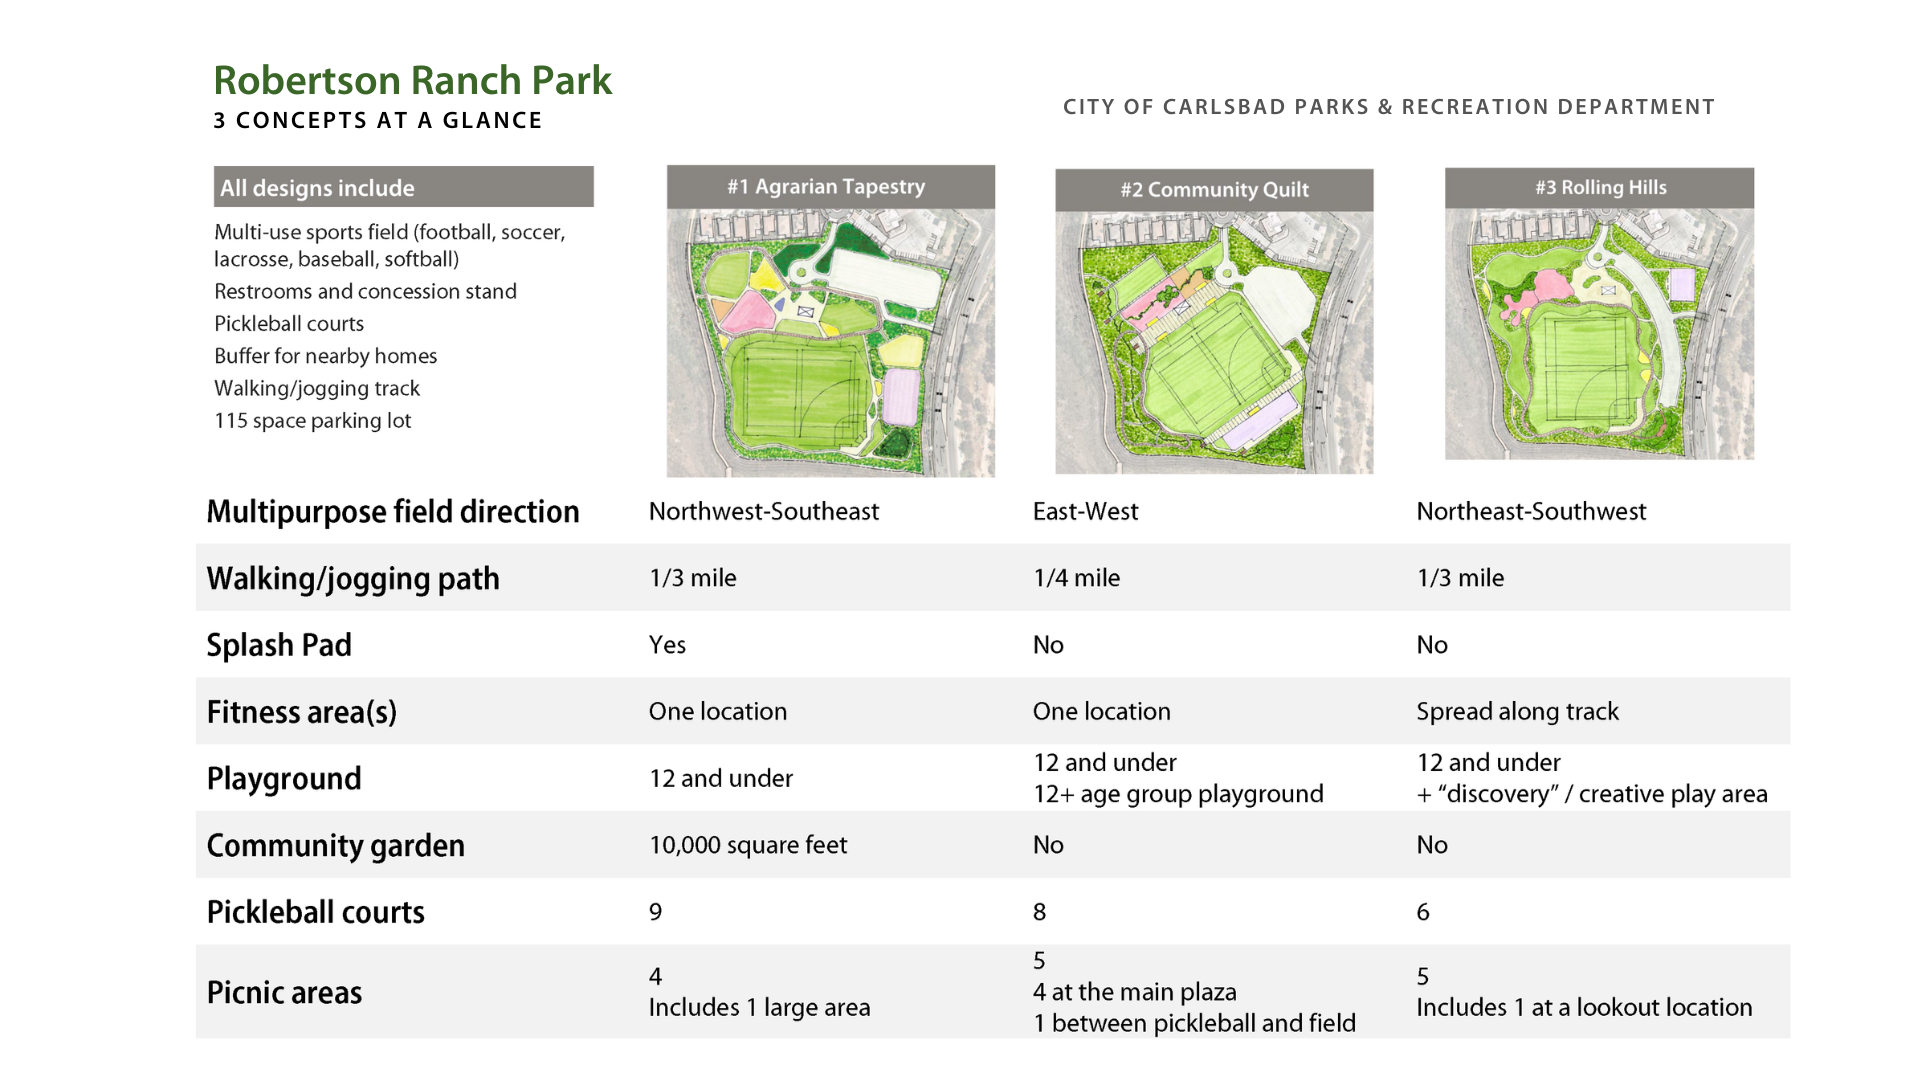 A comparison table highlights the differences in park features and amenities for three park design concepts: Design 1 - Agrarian Tapestry, Design 2 - Community Quilt, and Design 3 - Rolling Hills.